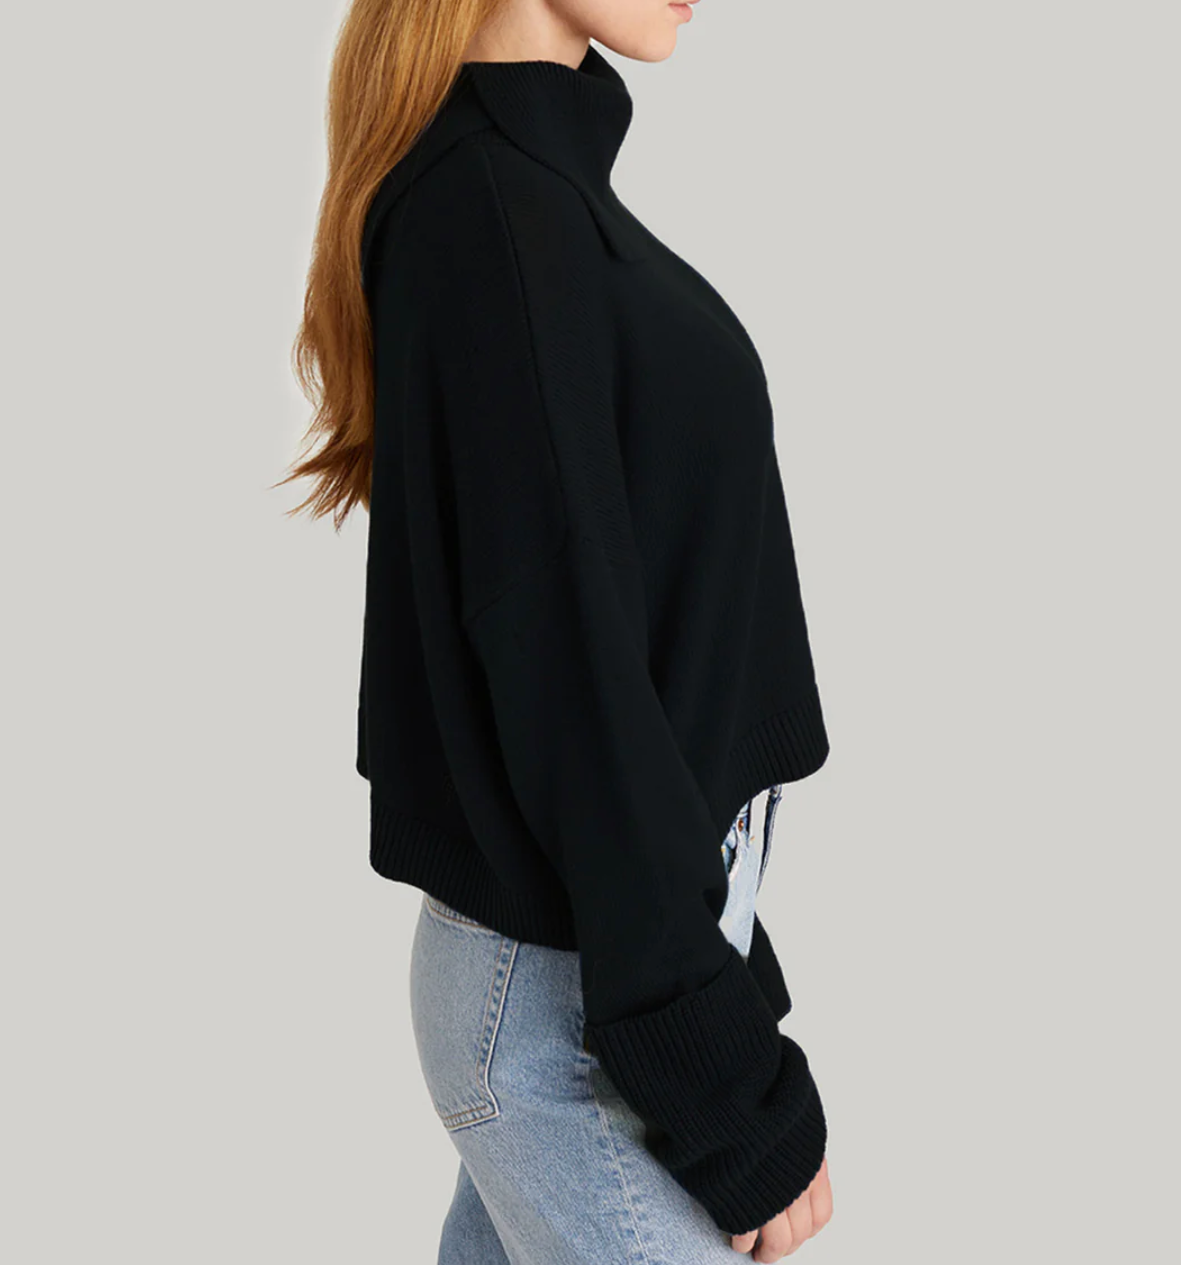 LILY SPLIT TURTLENECK SWEATER, RIGHT SIDE VIEW